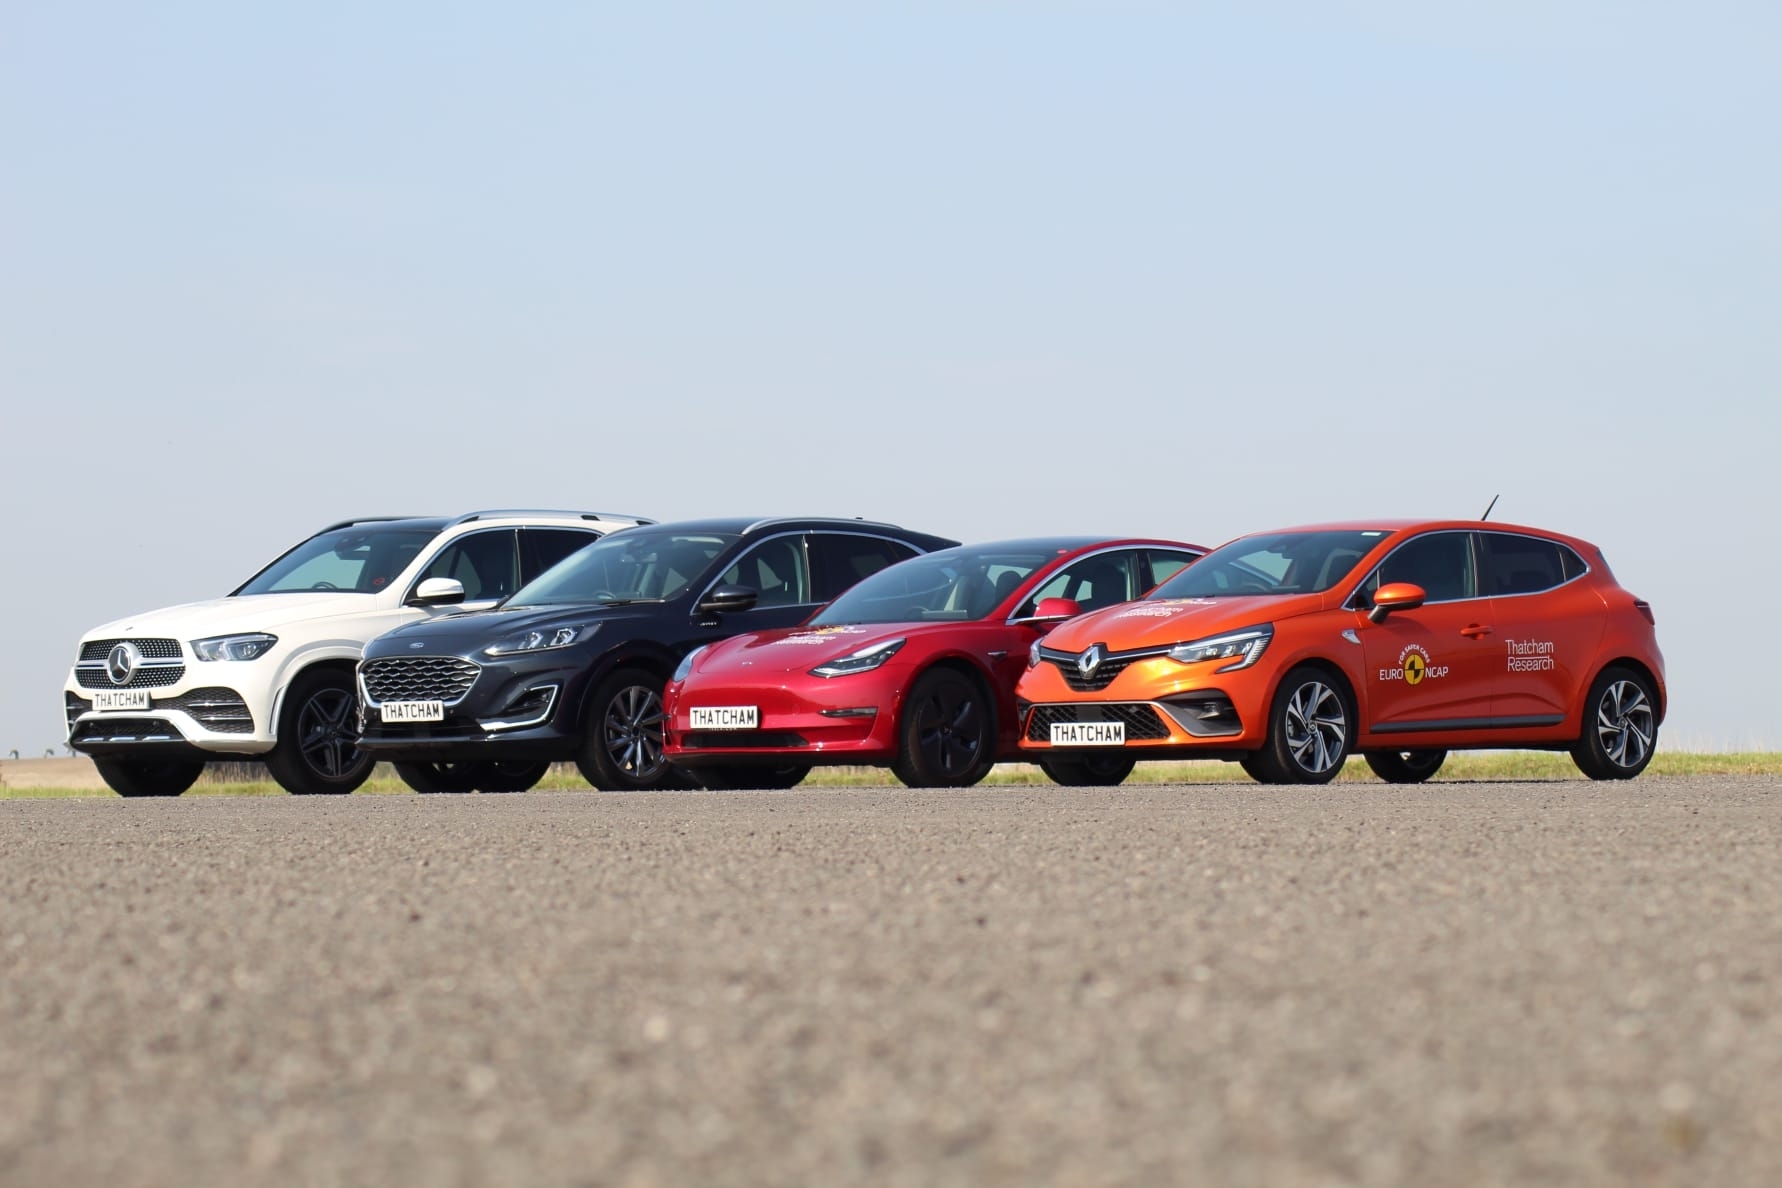 L-R, Mercedes GLE, Ford Kuga, Tesla Model 3, Renault Clio at the Thatcham Research test facility